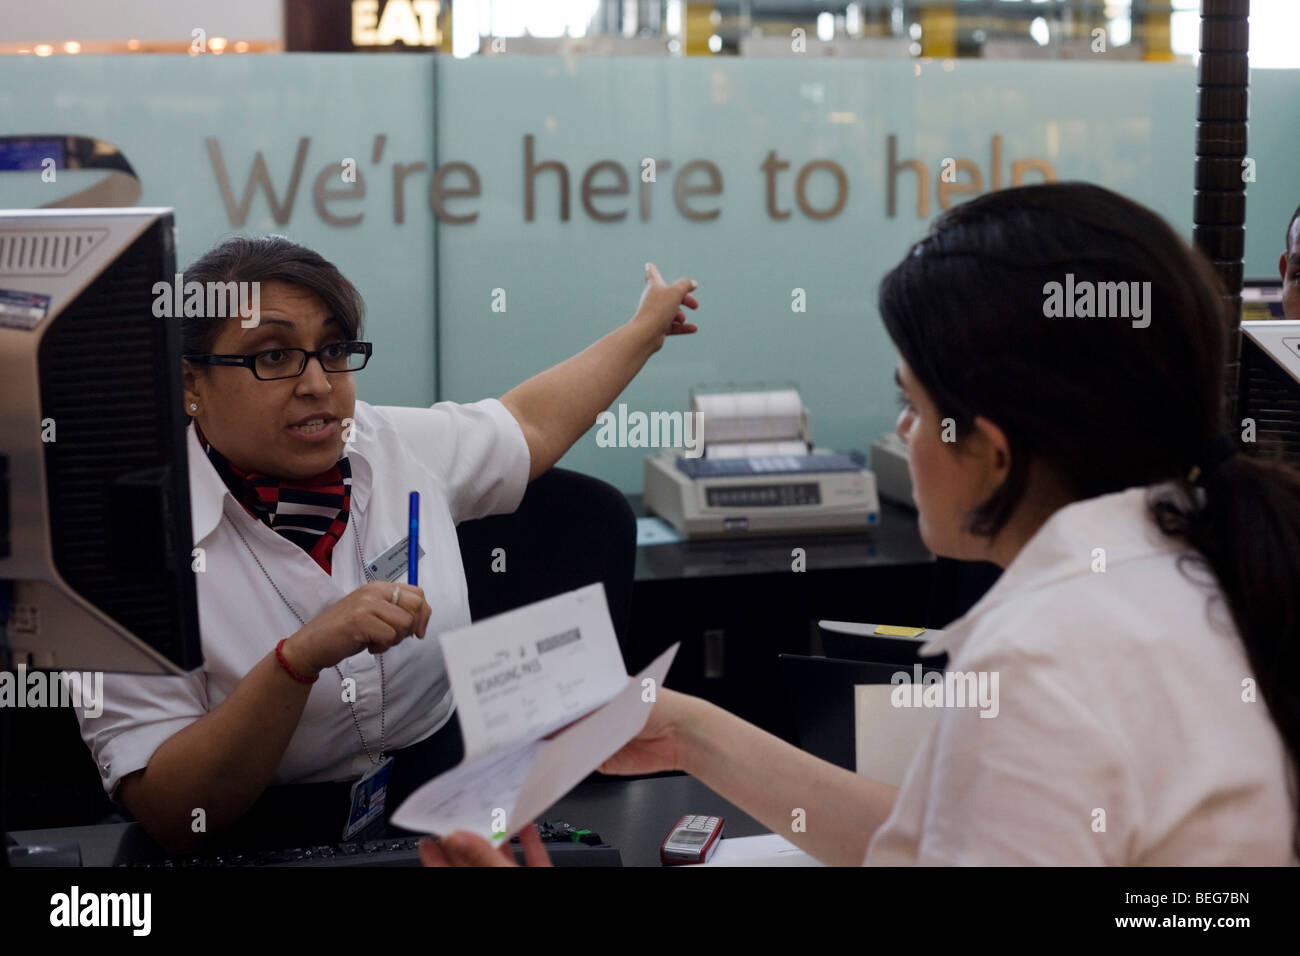 A female member of staff gives directions at the British Airways  information desk in Departures at Heathrow Airport's Terminal 5 Stock Photo  - Alamy